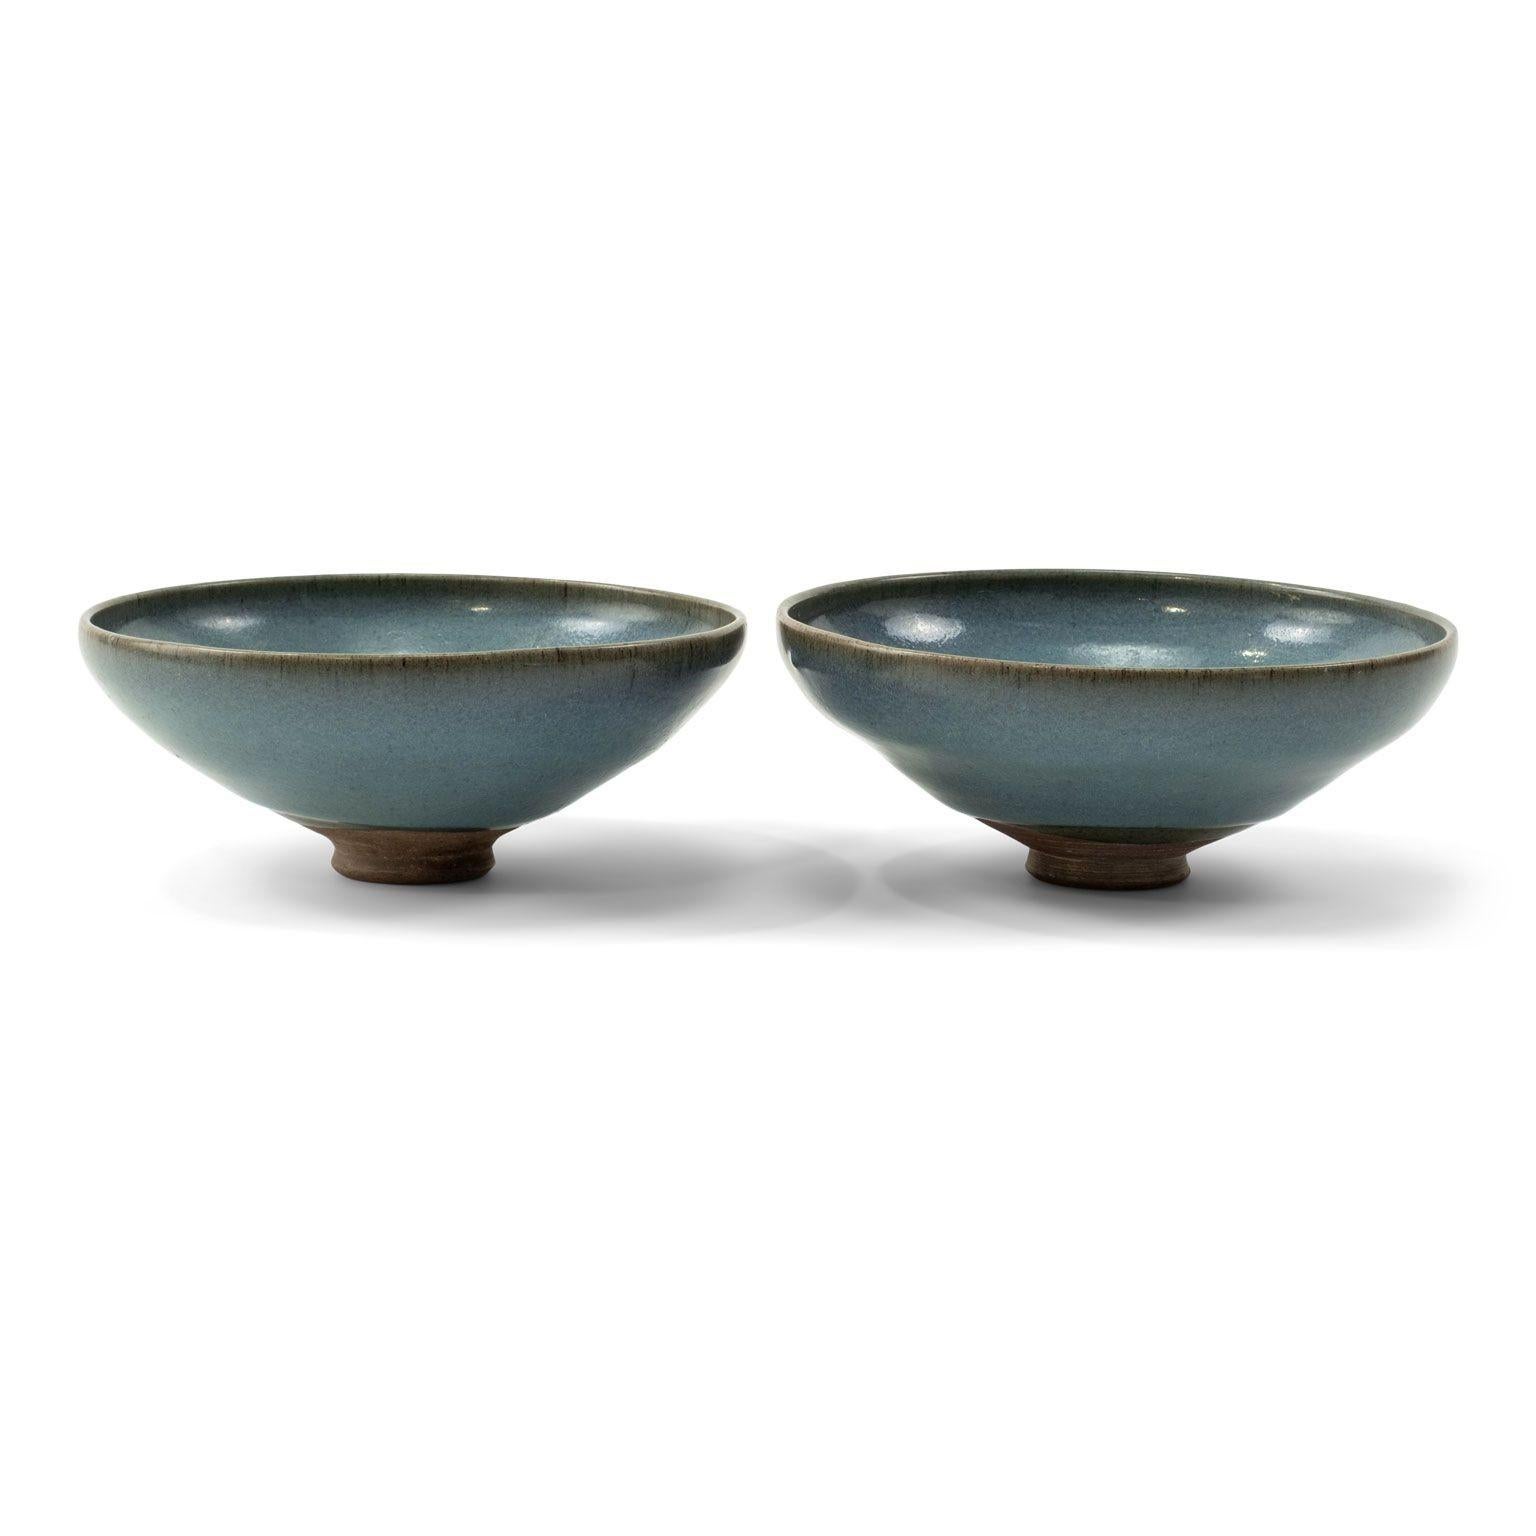 Pair of Chinese Jun ware bowls, Yuan dynasty (circa 1250-1400): Large Jun Yao, purple splashed stone ware bowl Yuan Dynasty, China. Well potted, on a neatly cut splayed foot, the bowl is applied with thick pale blue glaze, splashed with a patch of